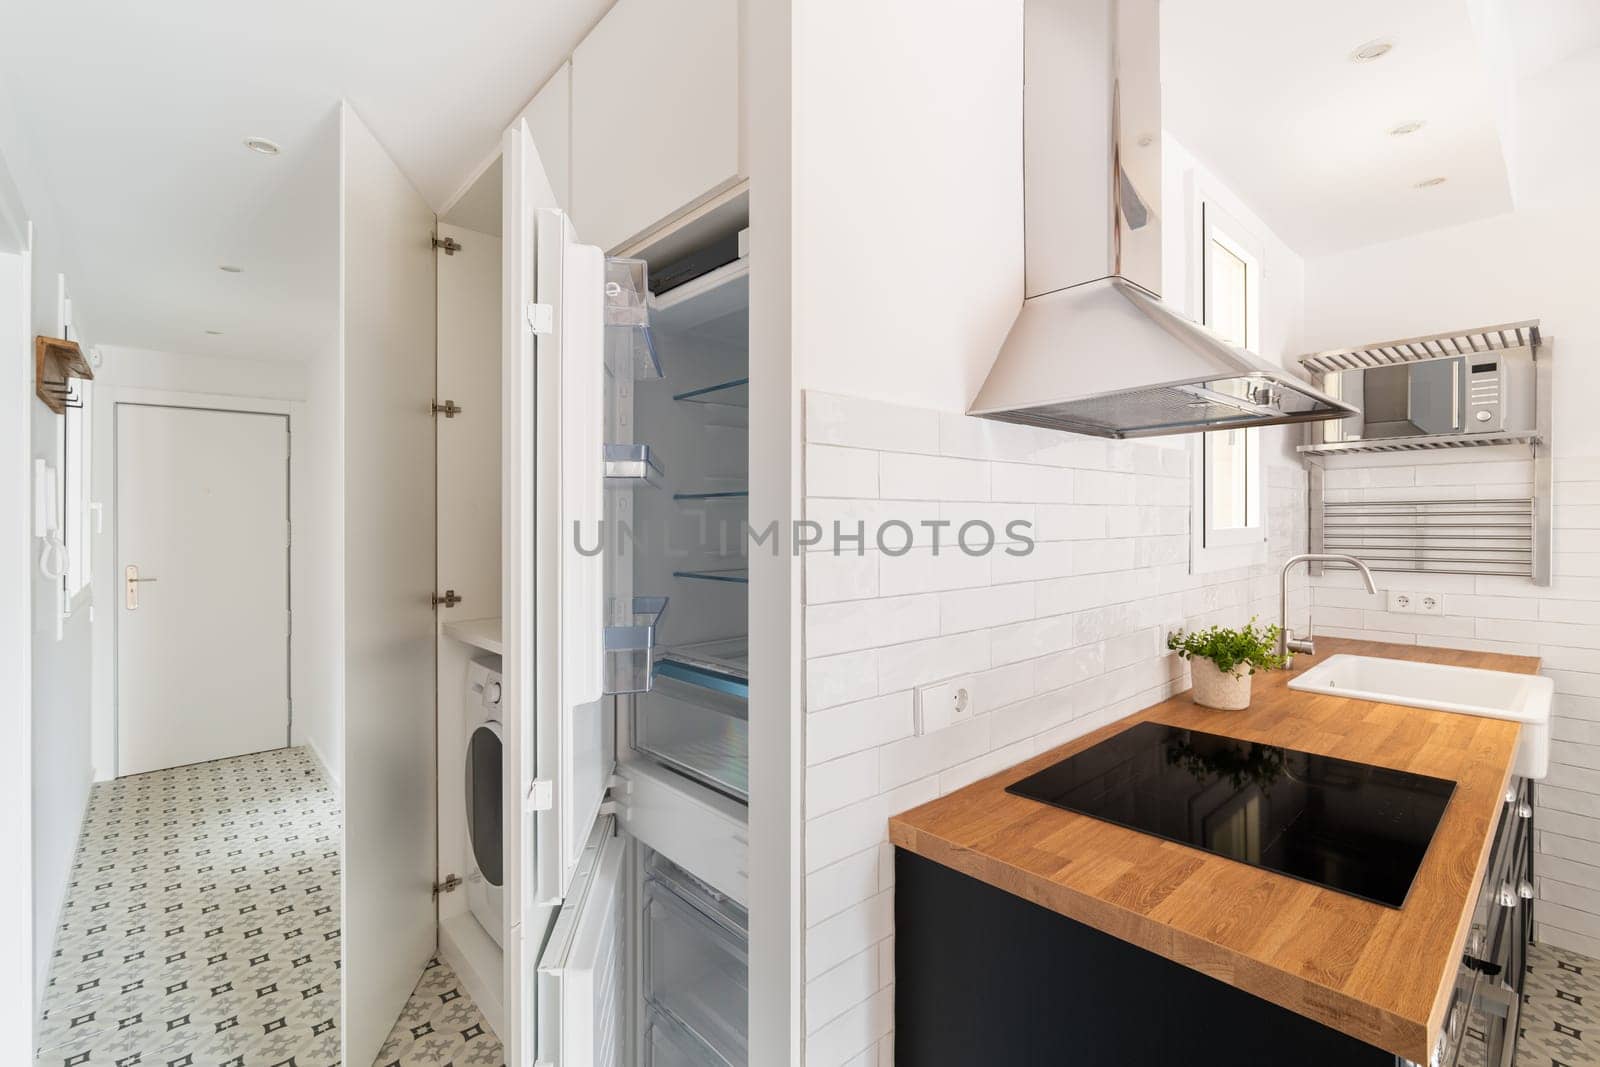 View of the kitchen and corridor with a washing machine and a built-in refrigerator compact but comfortable apartment in a new building. Mortgage house for a young family by apavlin